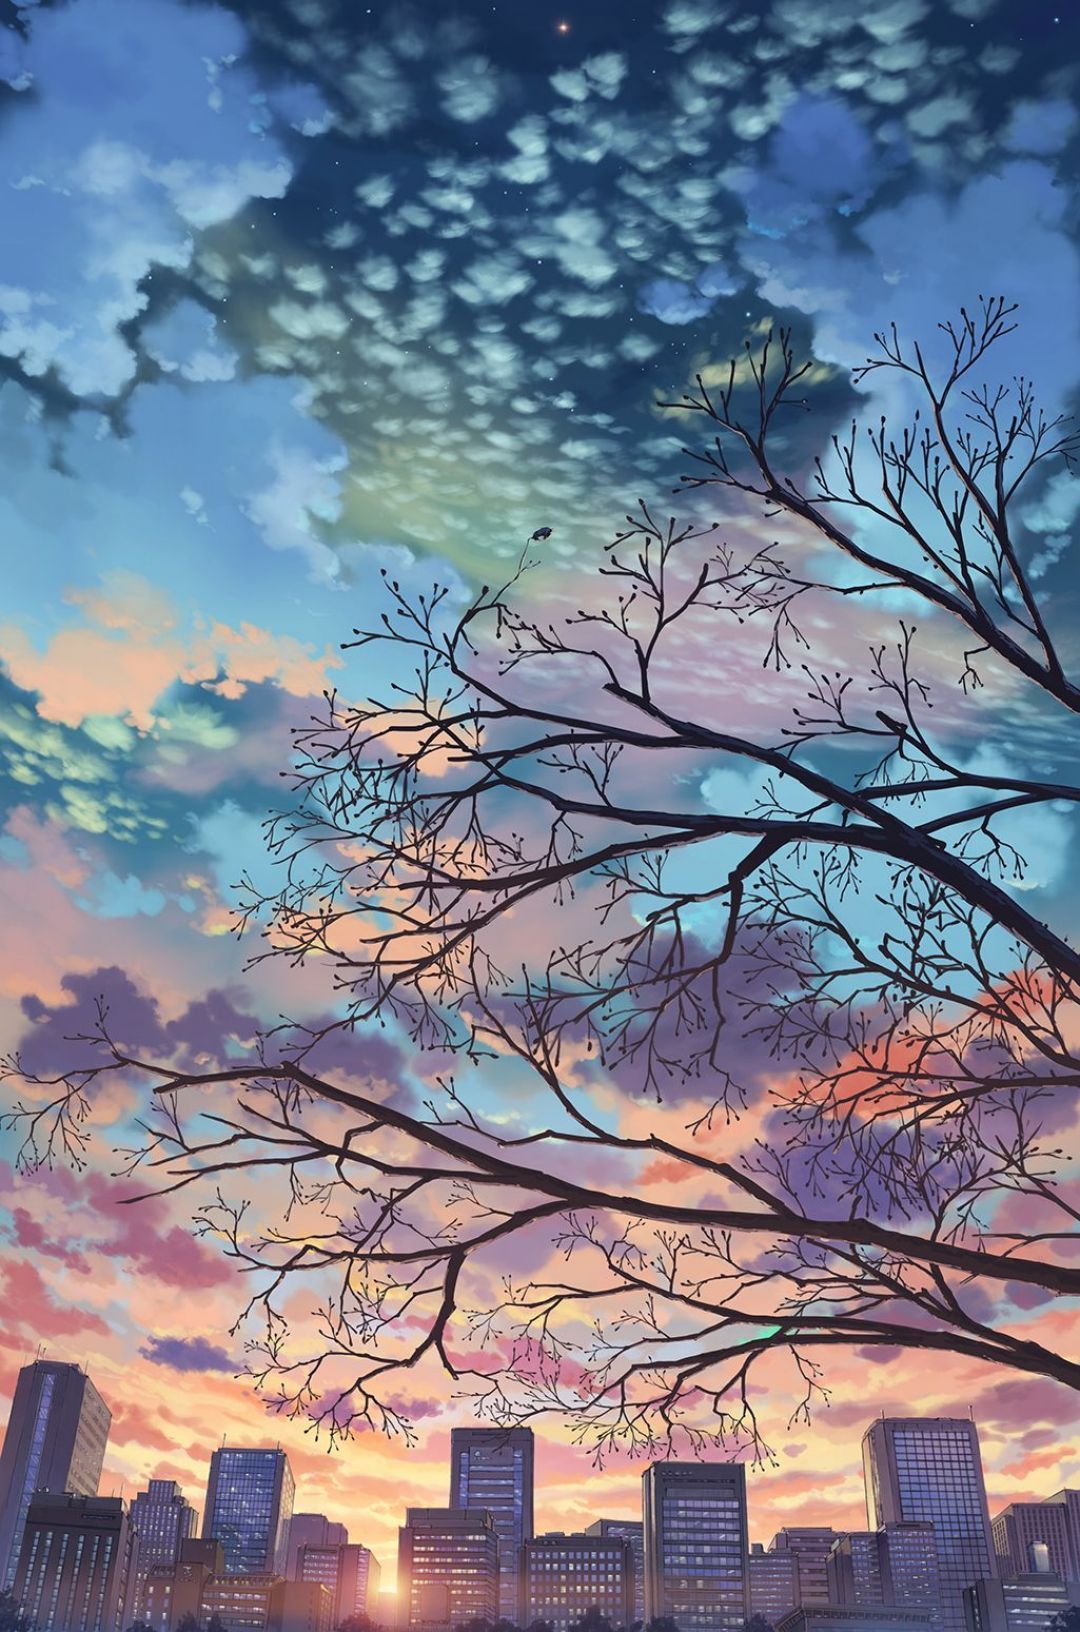 Anime Aesthetic Wallpaper Hd Aesthetic Wallpapers Images Aesthetic